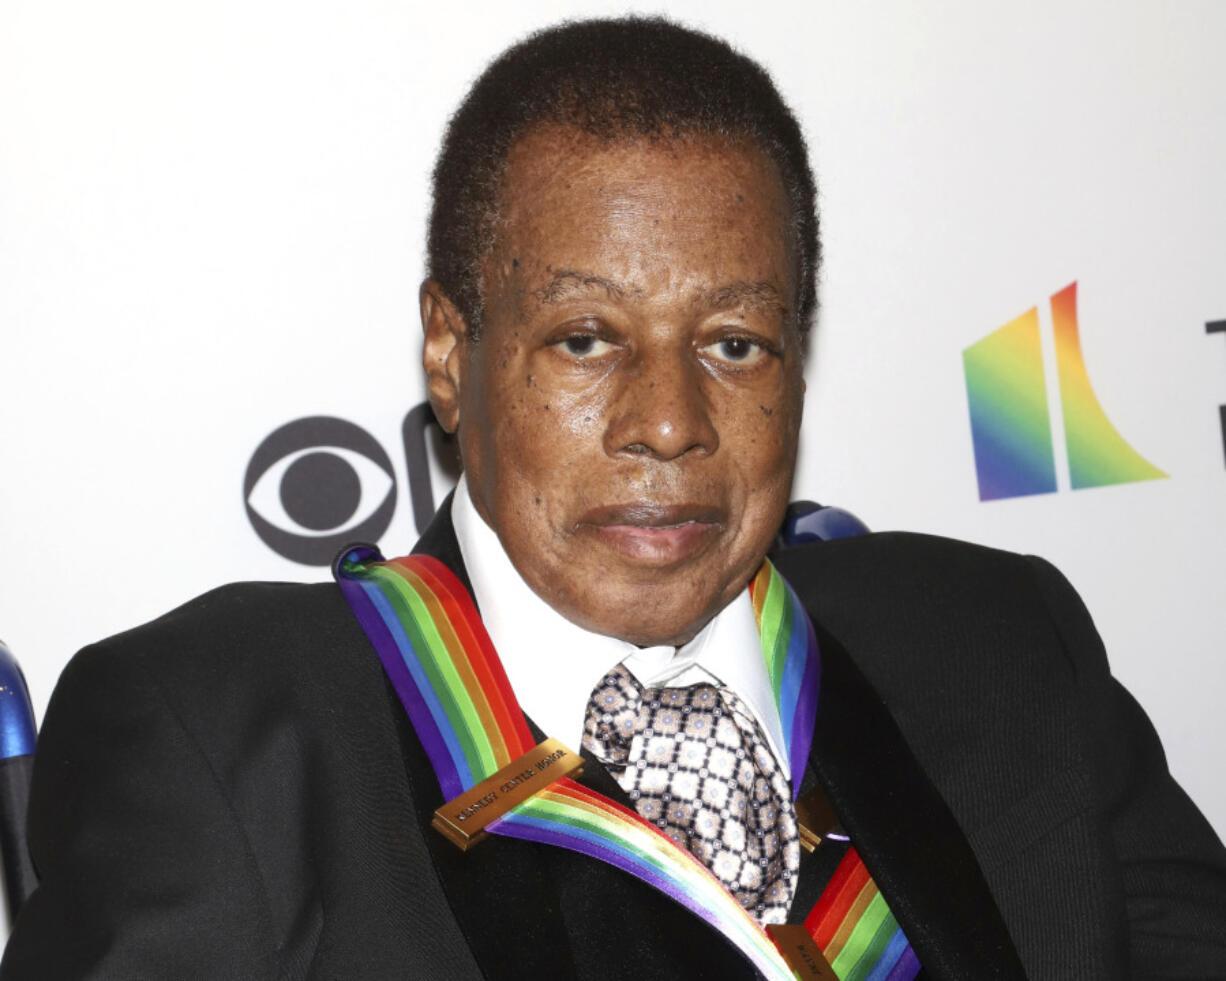 FILE - 2018 Kennedy Center honoree Wayne Shorter attends the 41st Annual Kennedy Center Honors at The Kennedy Center in Washington on Dec. 2, 2018. Shorter, whose lyrical jazz compositions and pioneering saxophone playing sounded through more than half a century of American music and made him one of the most influential innovators in jazz, died in Los Angeles on Thursday, March 2, 2023. He was 89.